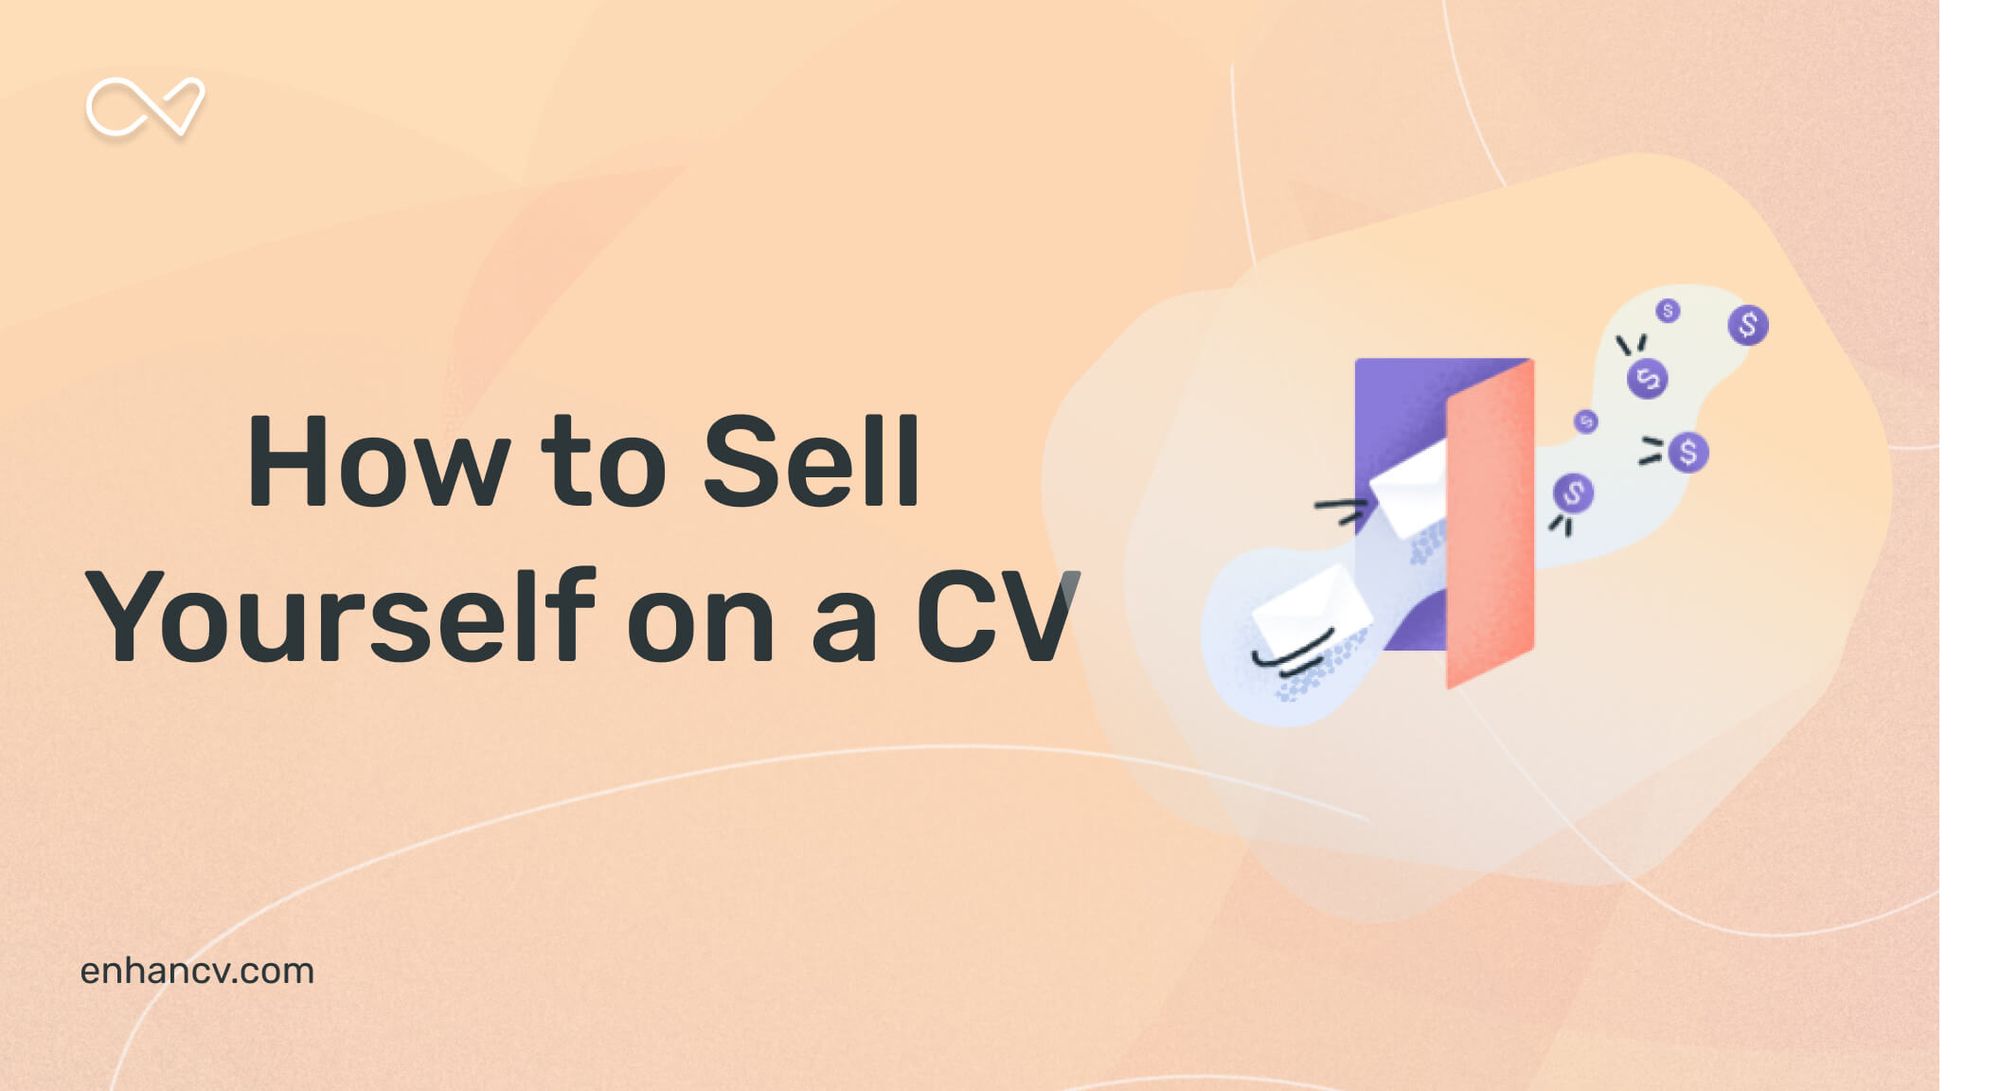 How to Sell Yourself on a CV